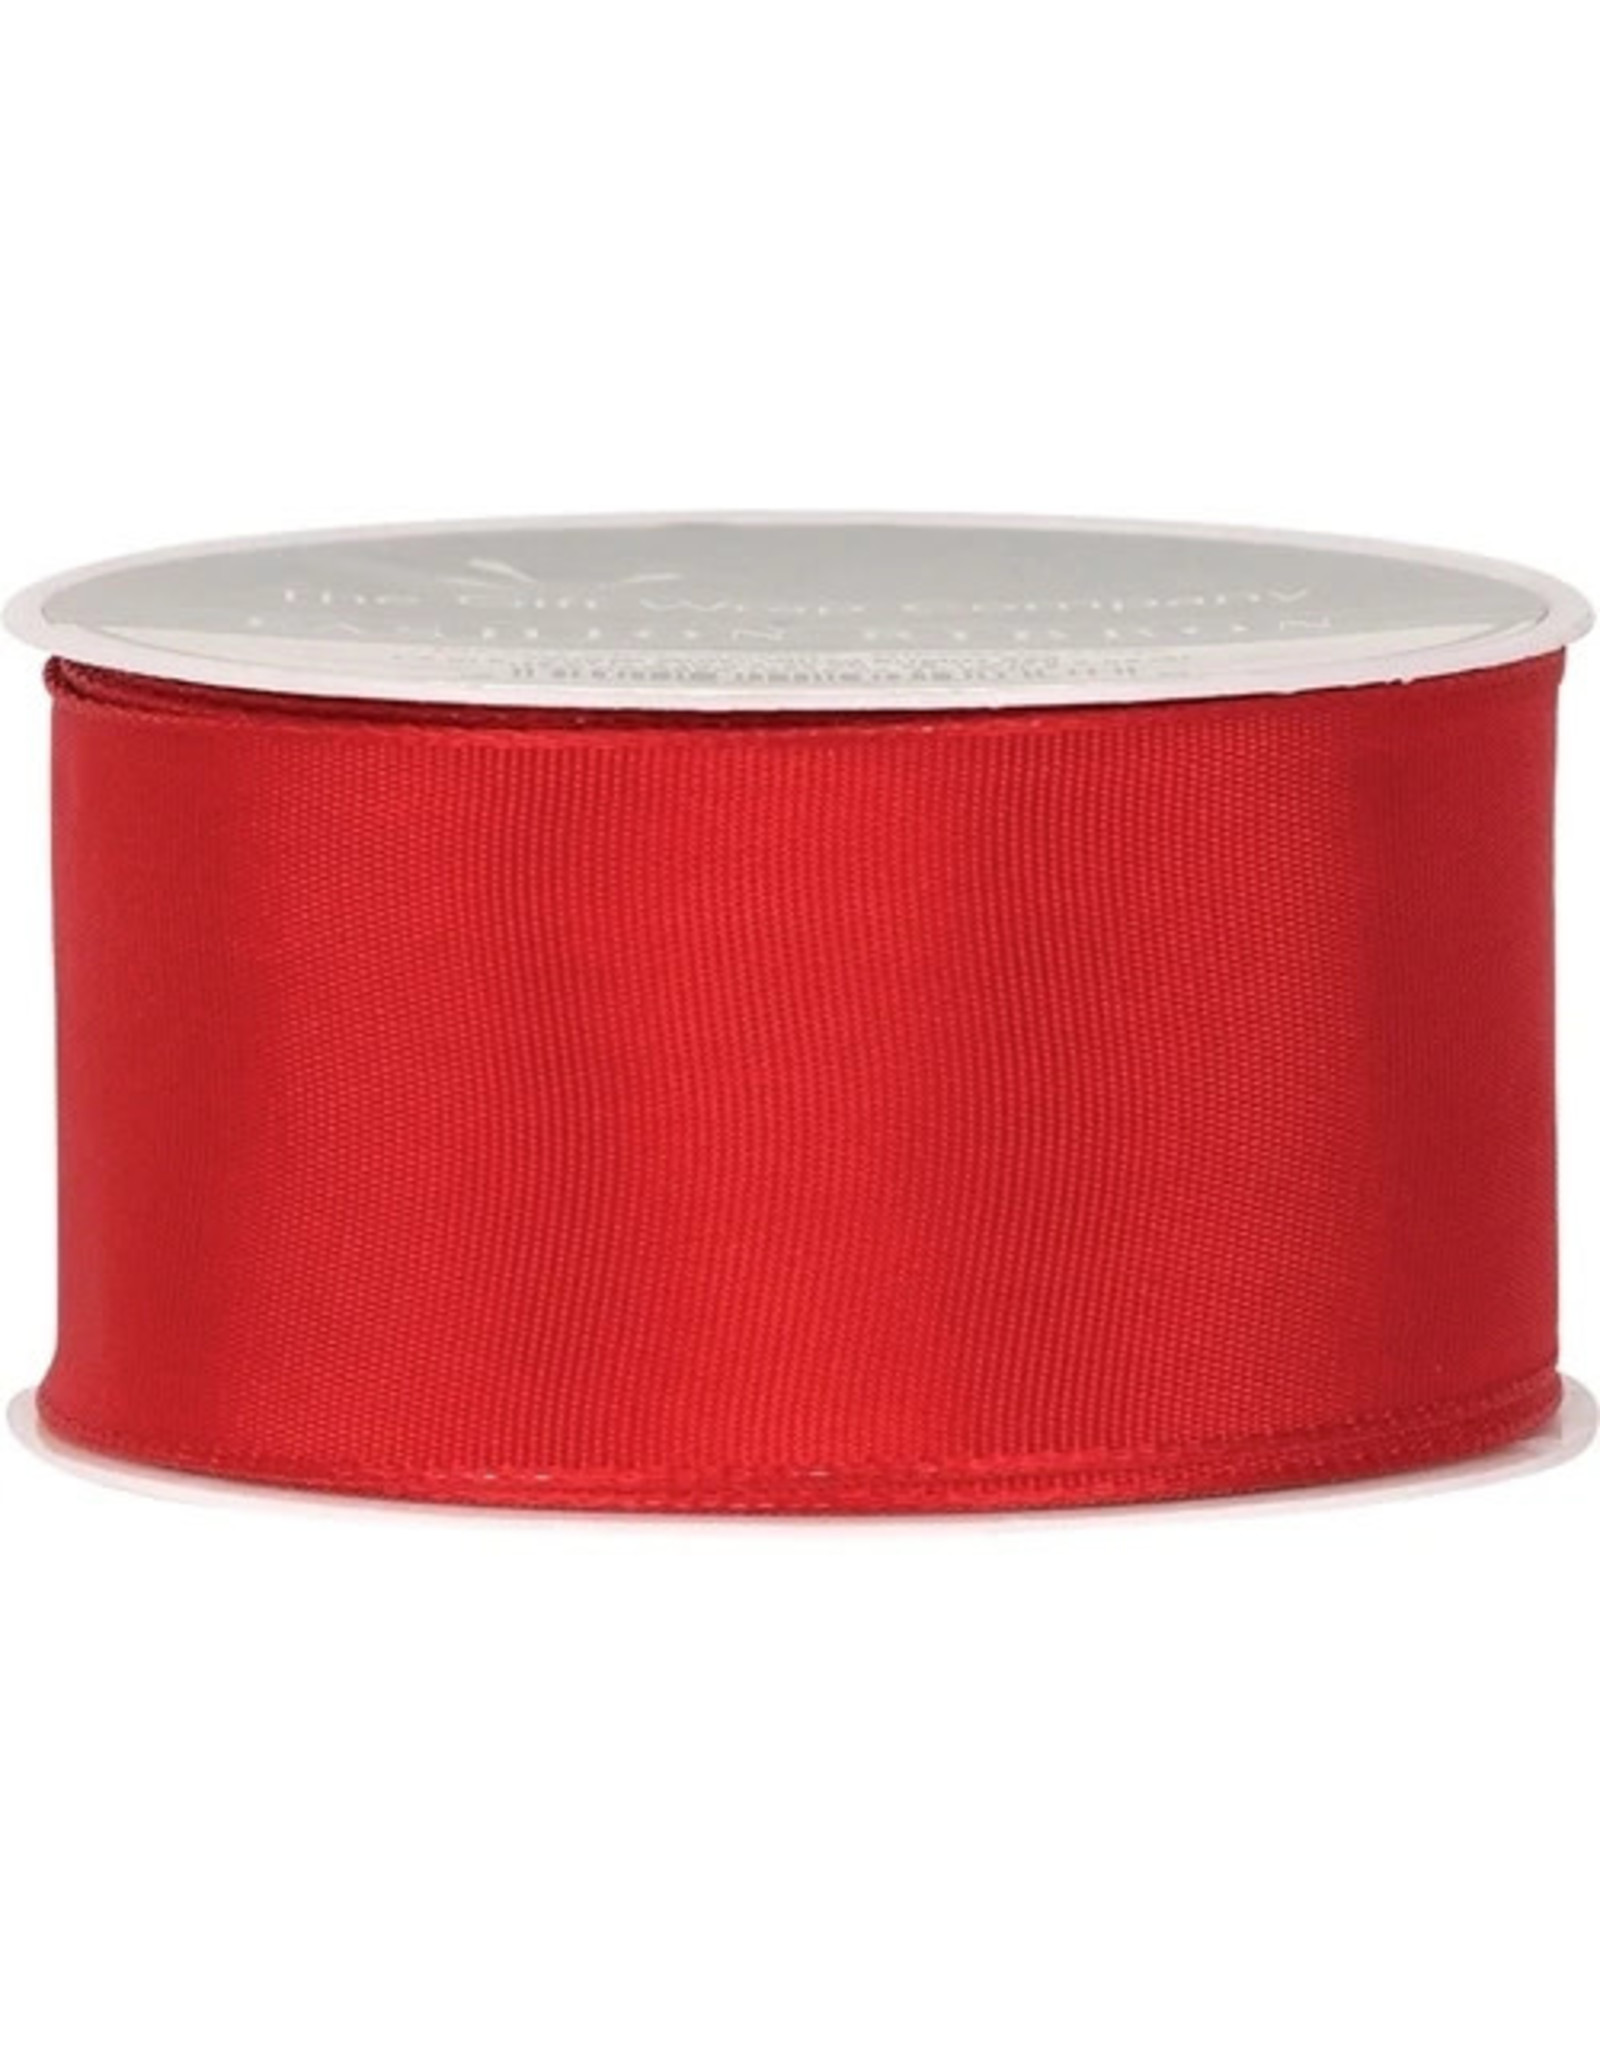 The Gift Wrap Company Bright Red Wired Edge Ribbon